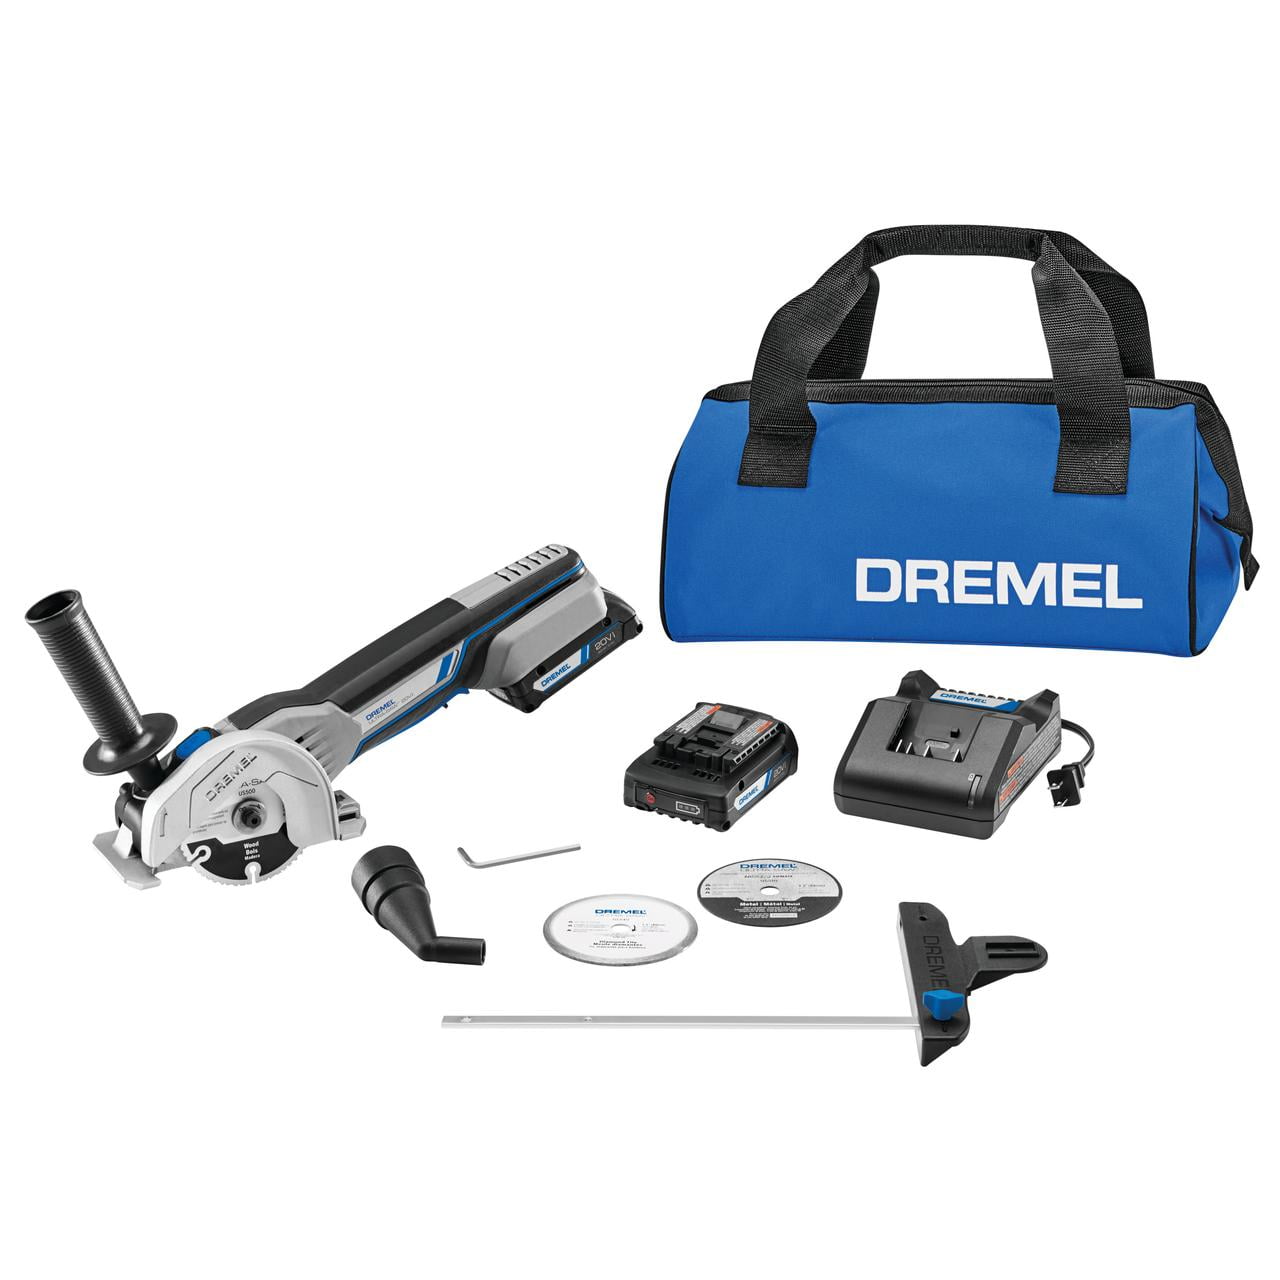 Dremel US20V-02 – Compact Circular Saw Kit with (2) 20V Batteries, Charger & Storage Bag, Cordless Compact Saw, Ideal for Flush Cutting, Plunge Cutting and Surface Preparation